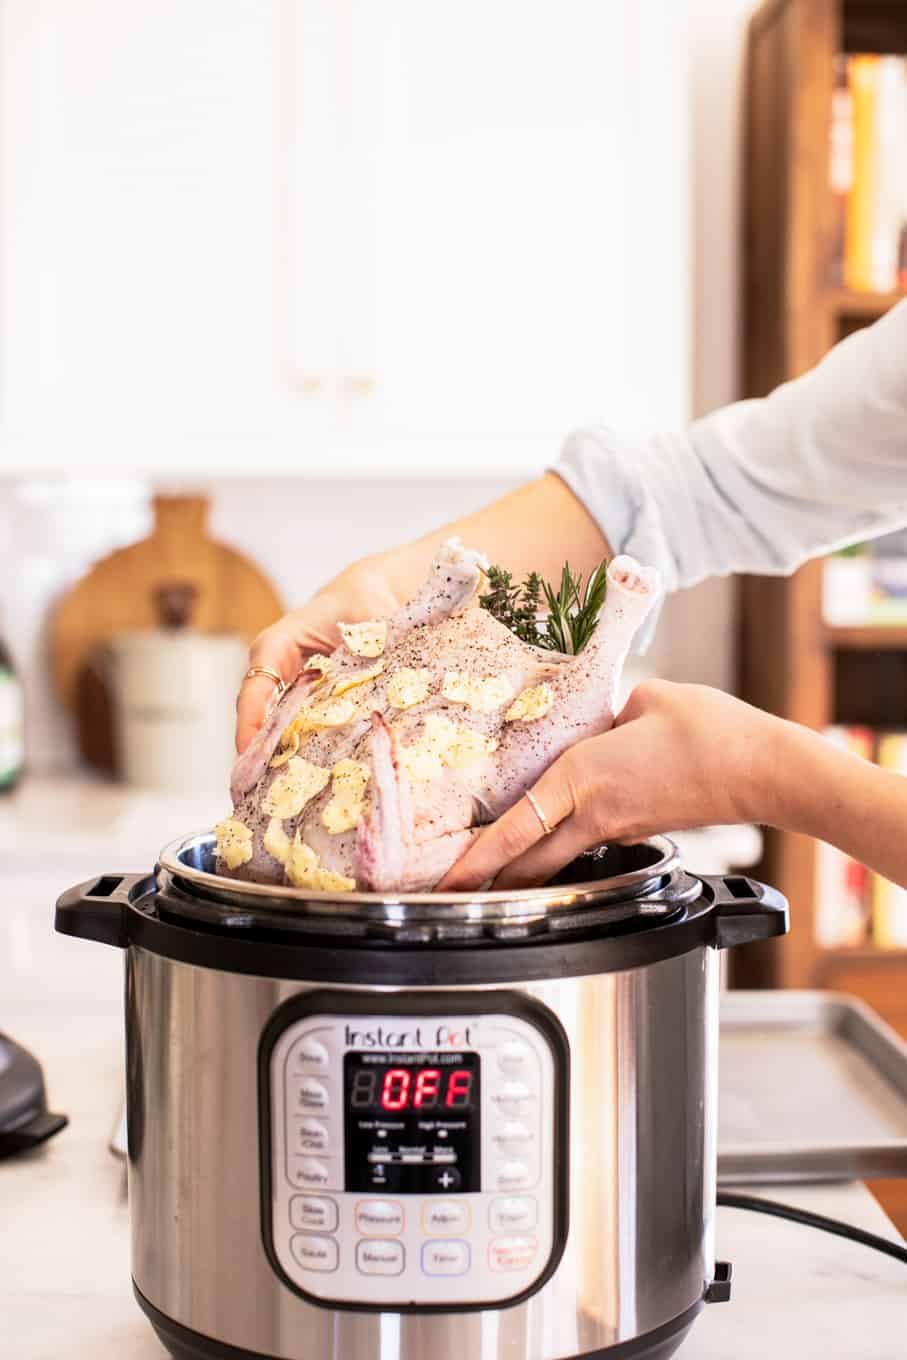 Putting Chicken into Instant Pot